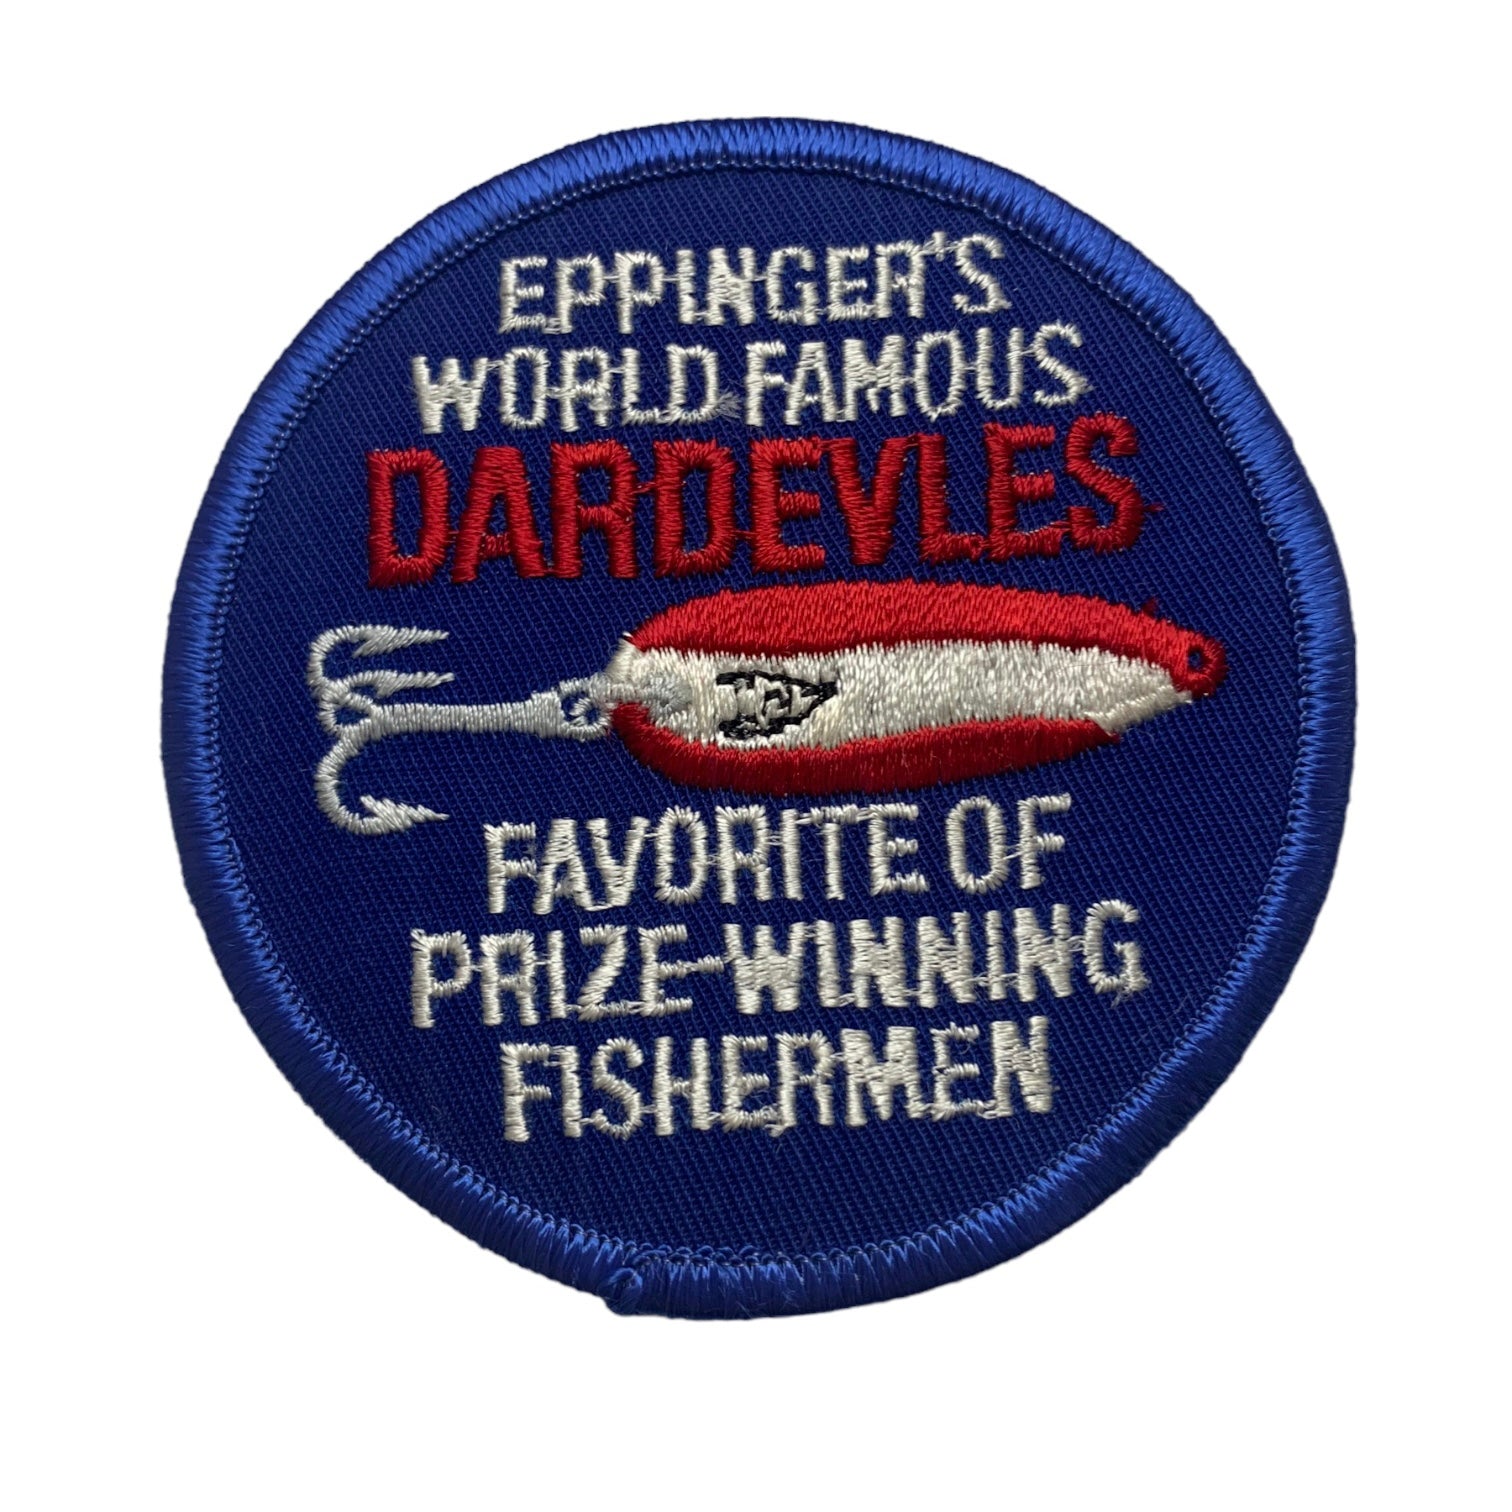 EPPINGER'S WORLD FAMOUS DARDEVLES Vintage Patch • Favorite of Prize-Wi –  Toad Tackle